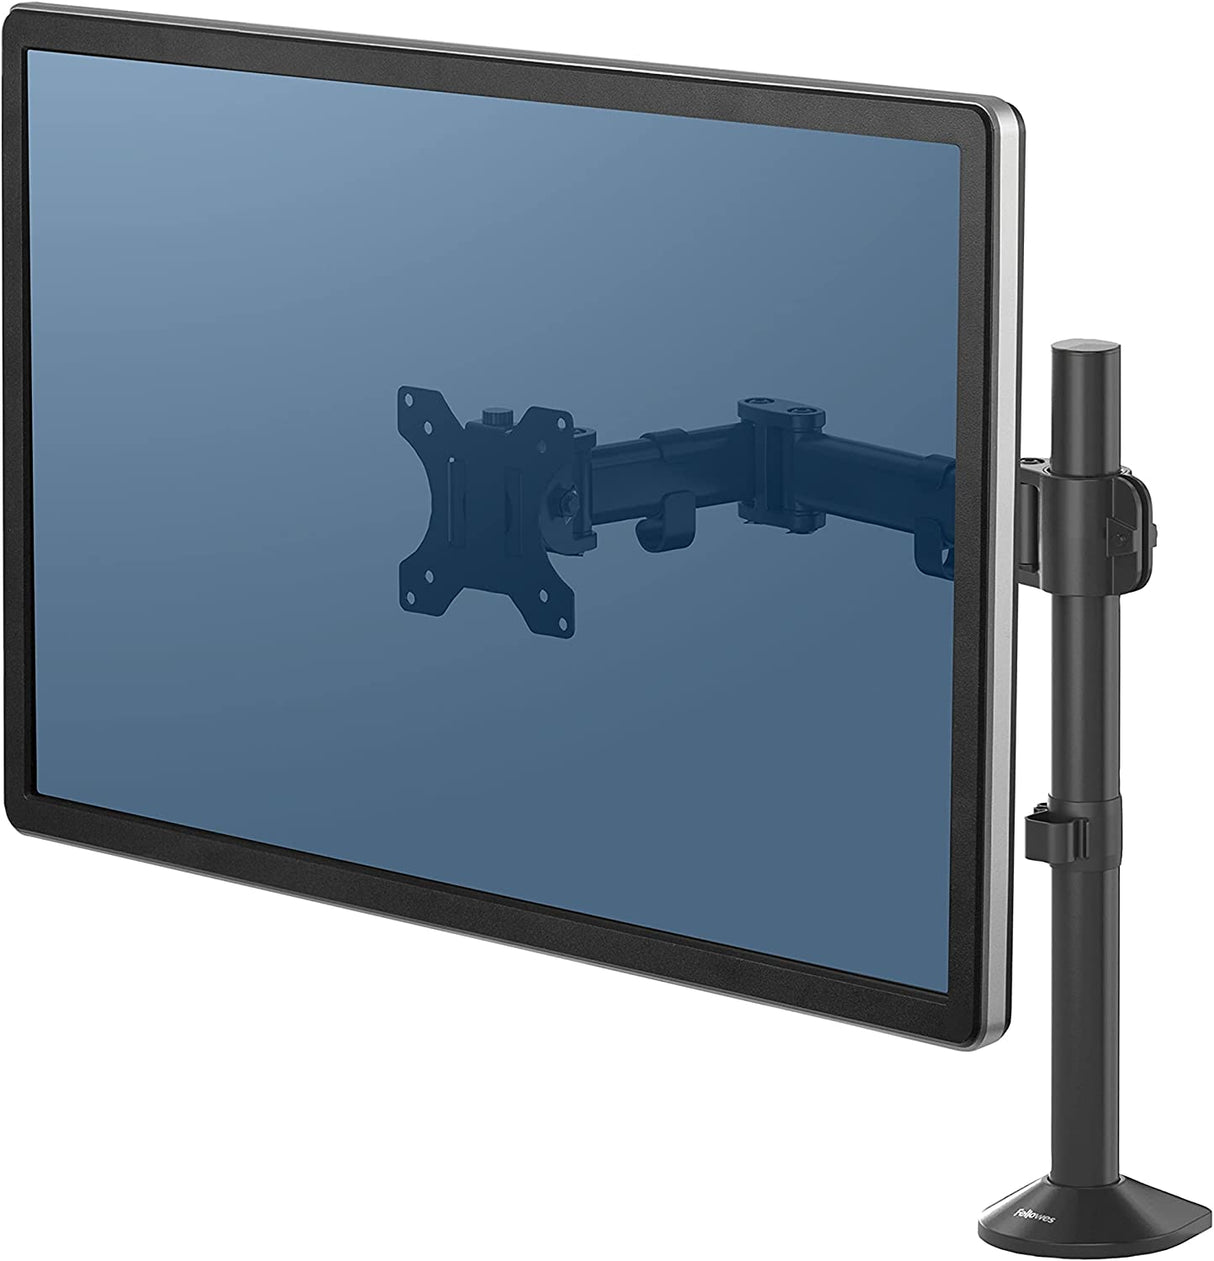 Fellowes Reflex Adjustable Single Monitor Arm, Black, VESA Bracket, Clamp or Grommet Mount, Holds Monitor up to 30” / 24 lbs.